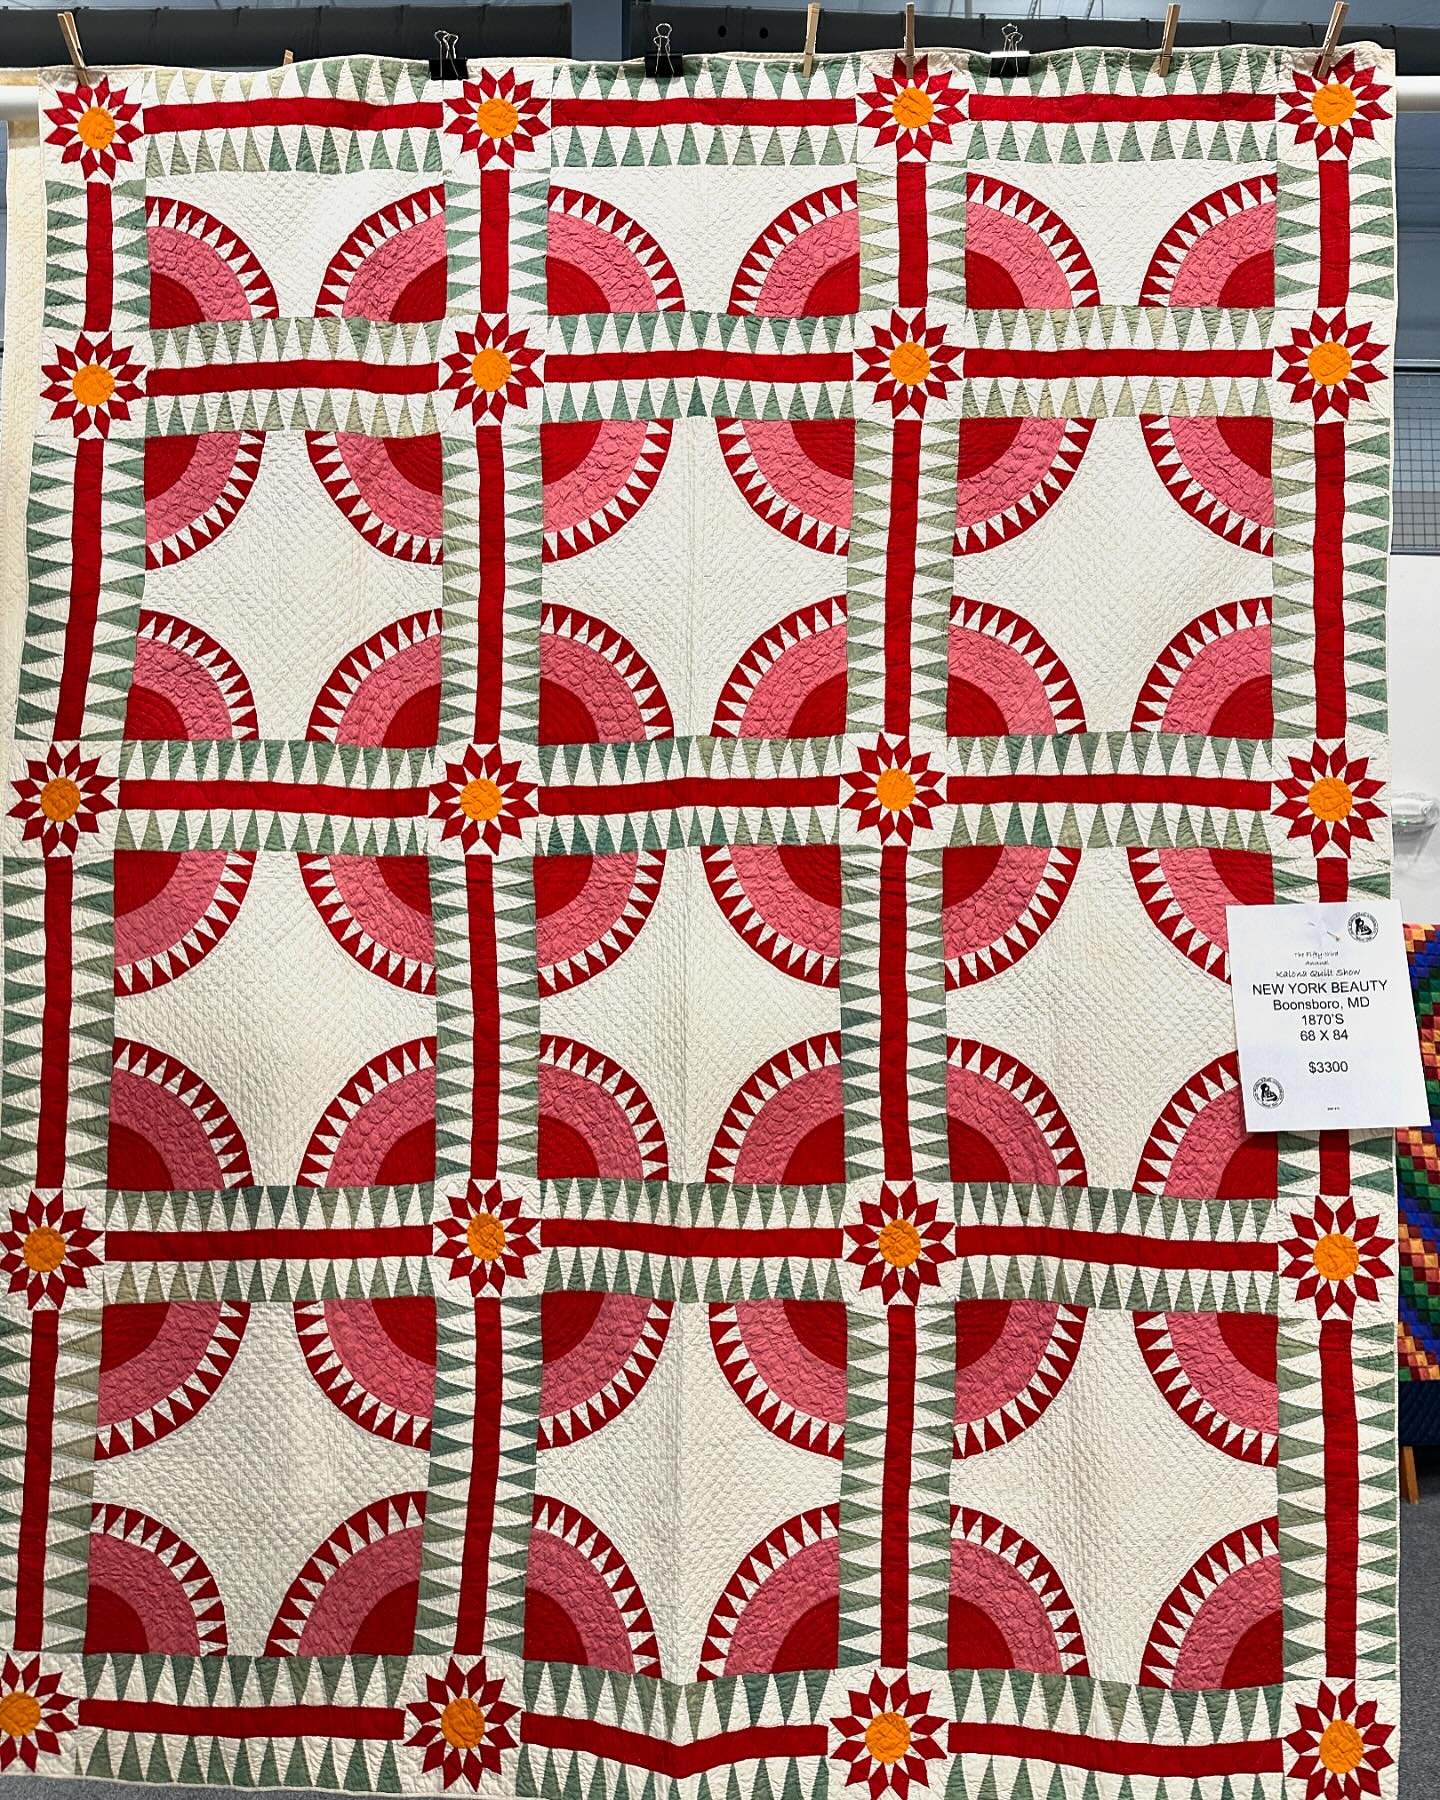 I neglected to post these beauties from the Kalona Quilt Show at the end of April. Some real jaw-droppers! #kalonaquiltshow #quiltsale #quilts #vintagequilts #vintage #appliqu&eacute; #piecing #flyinggeese #newyorkbeauty #whigrose #doubleweddingringq